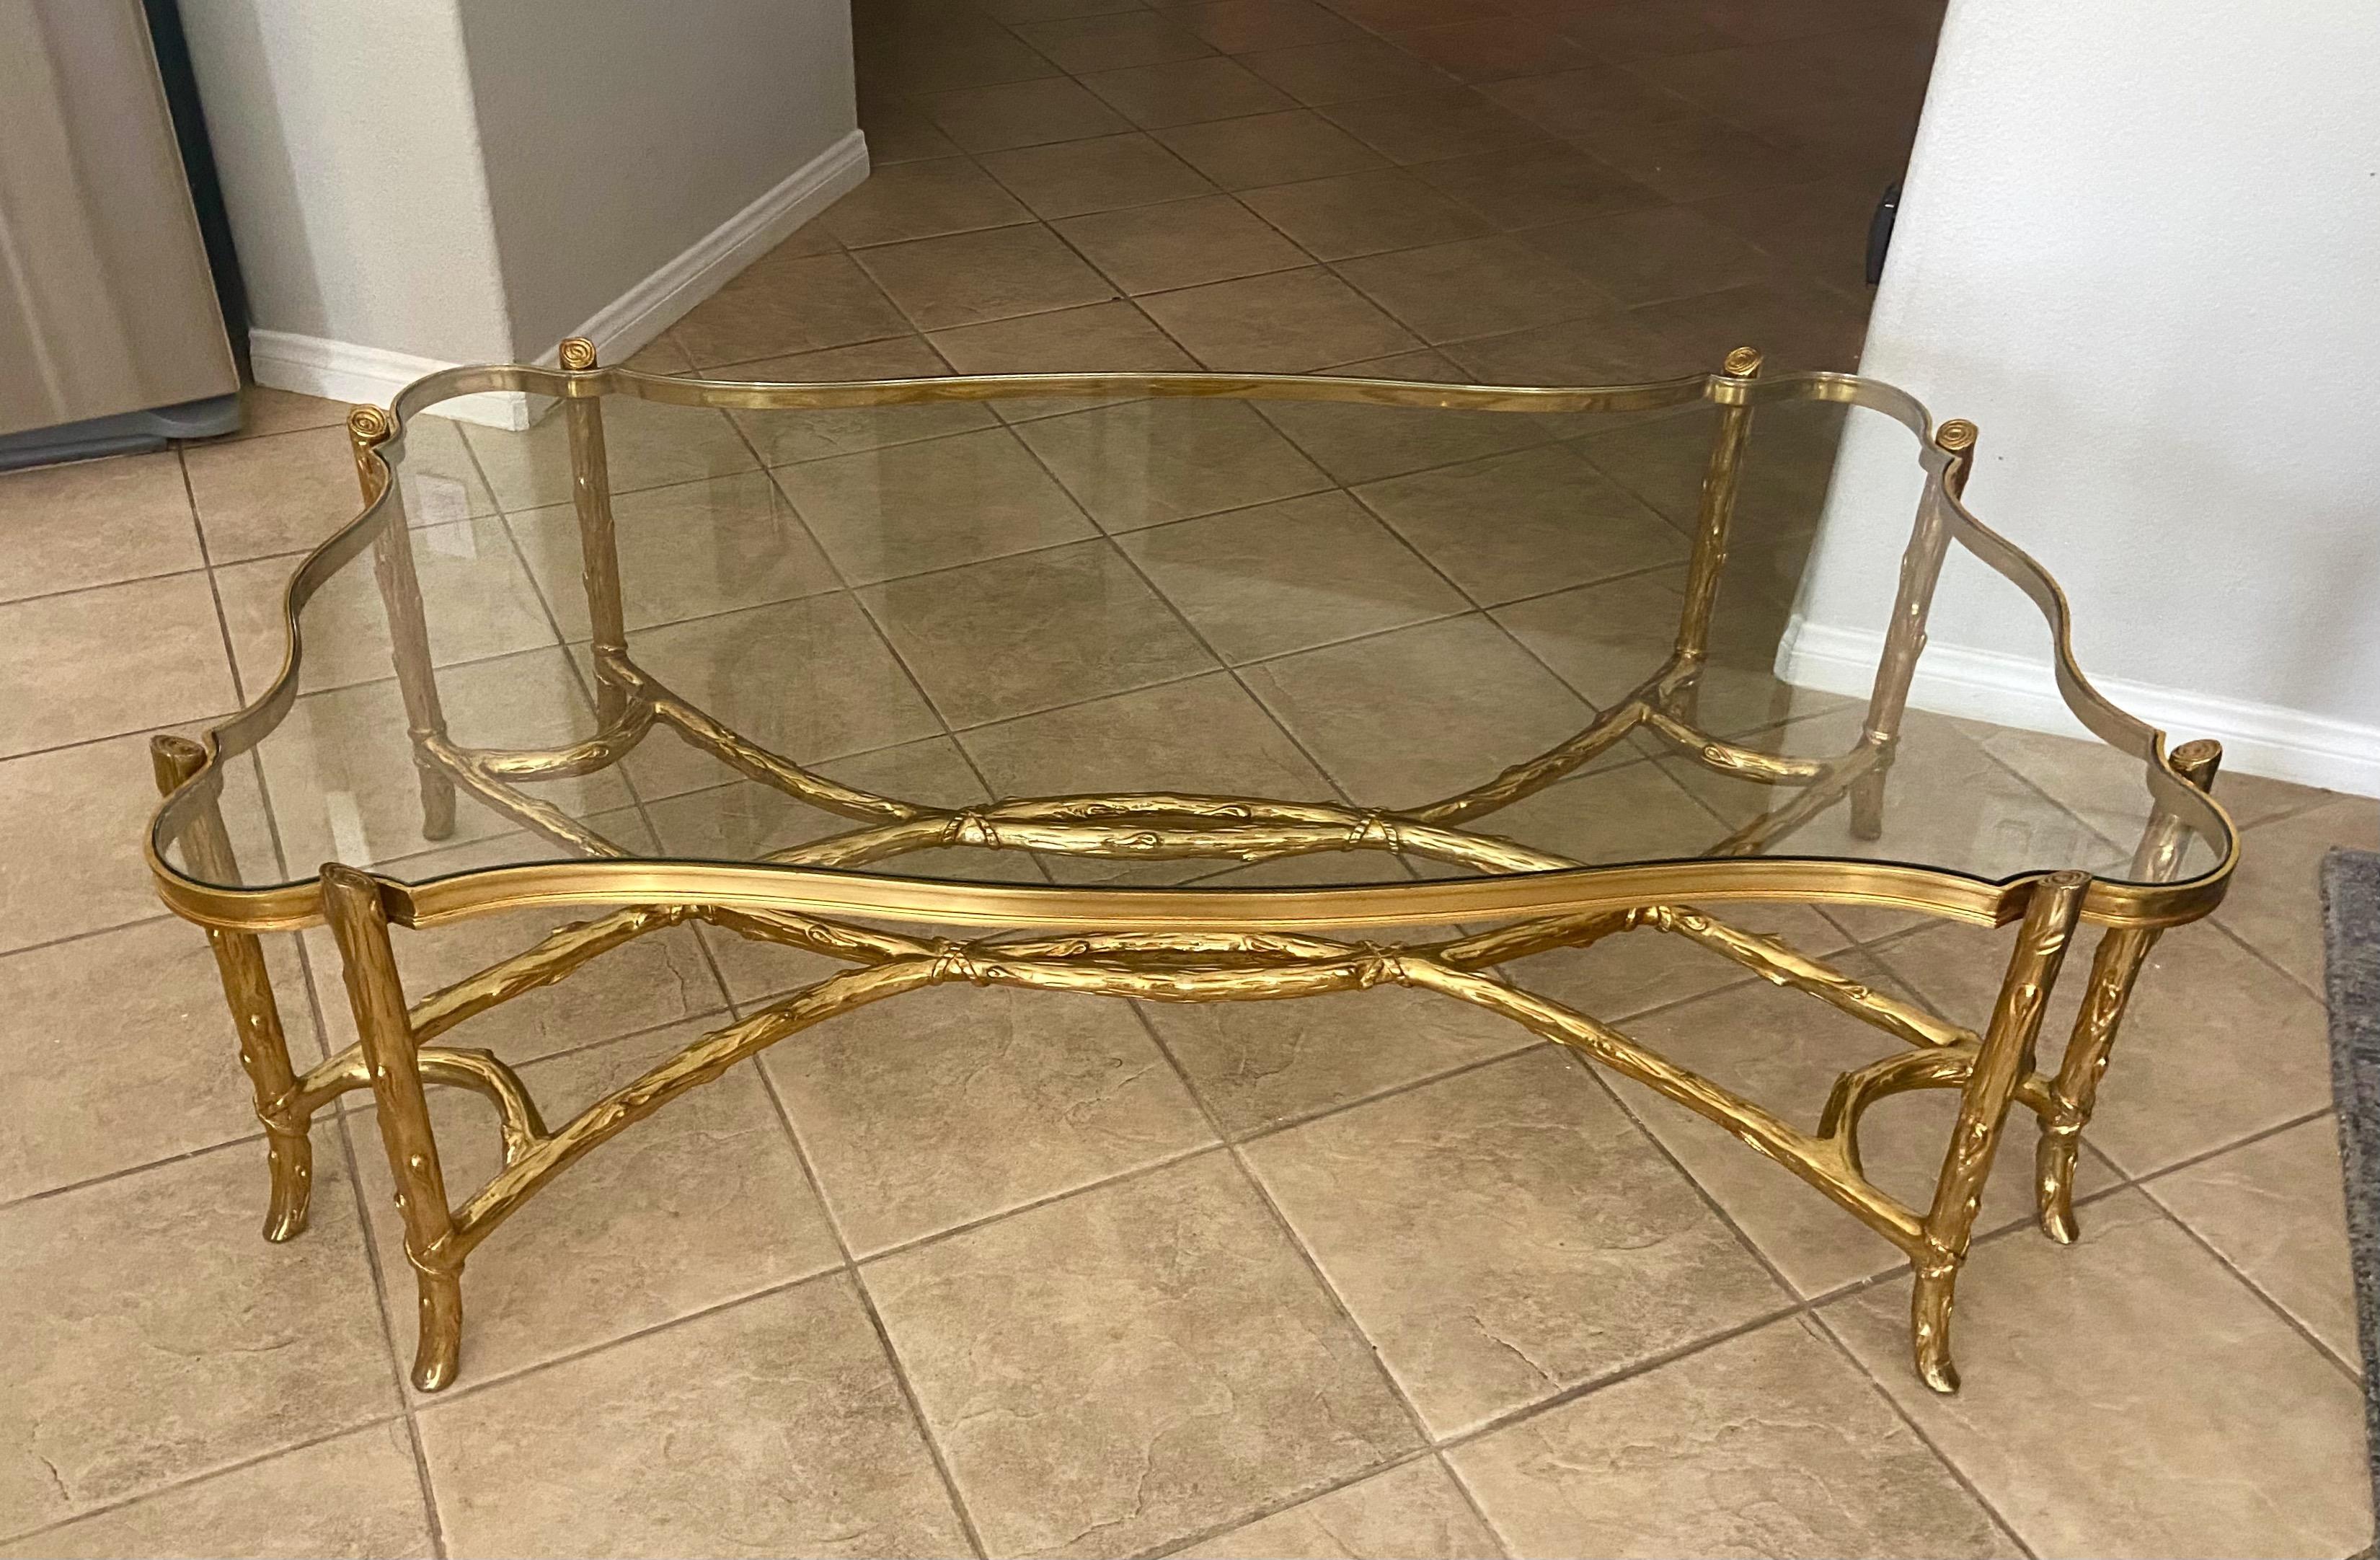 Large one of a kind cast brass (or bronze) intertwining tree branches coffee table. The table is serpentine shape with an intricately cut inset glass top. The table is very heavy and solid with quality workmanship throughout. To our knowledge there